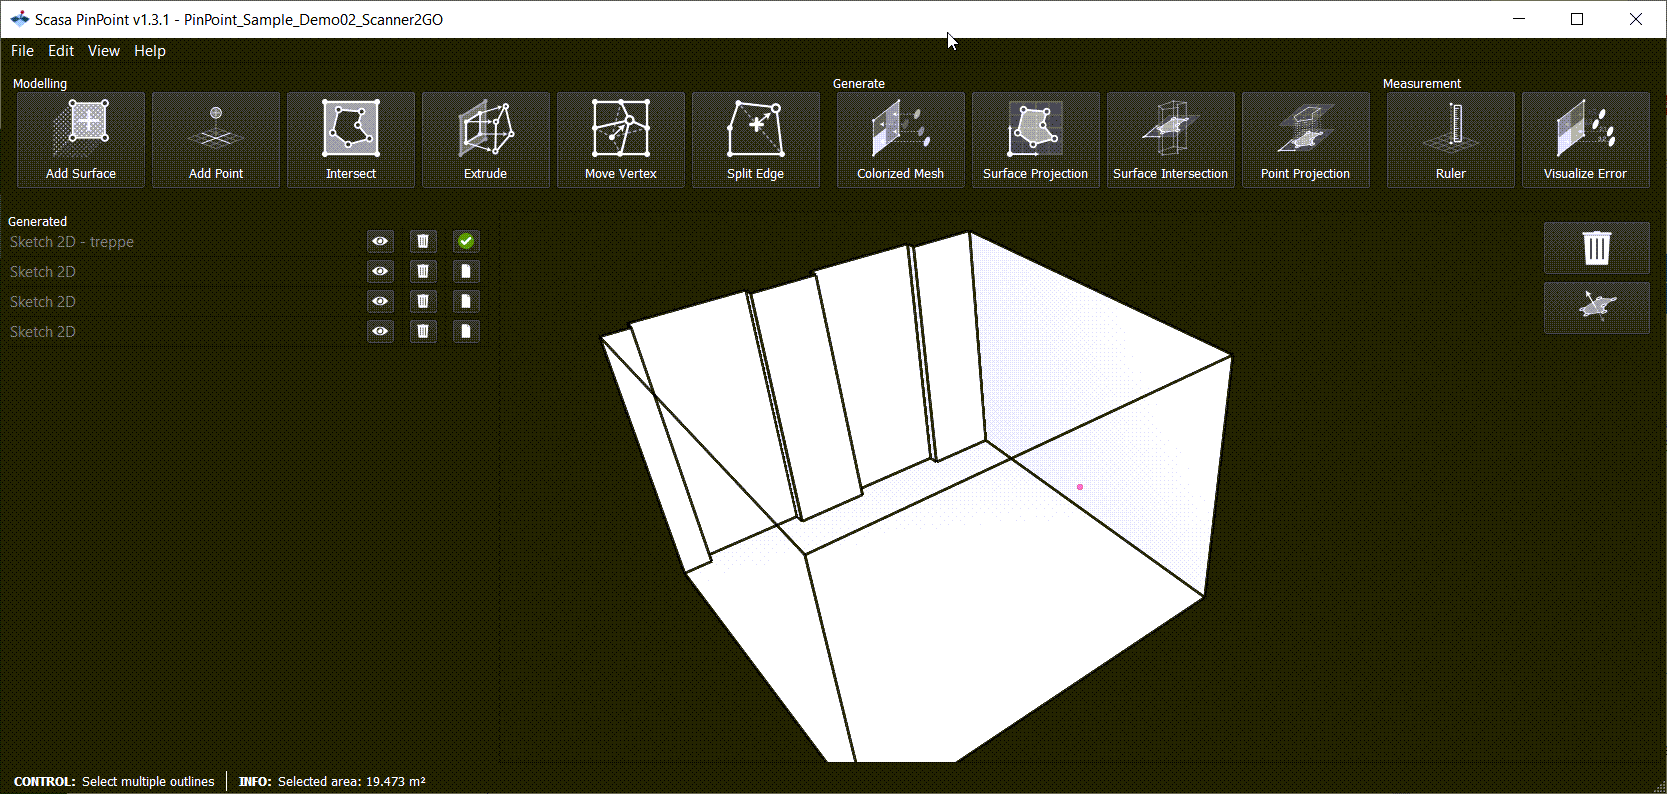 Funktion_Extrude_3D_Model_im_insspect_Mode_-_PinPoint_Tutorial_Scanner2GO.png